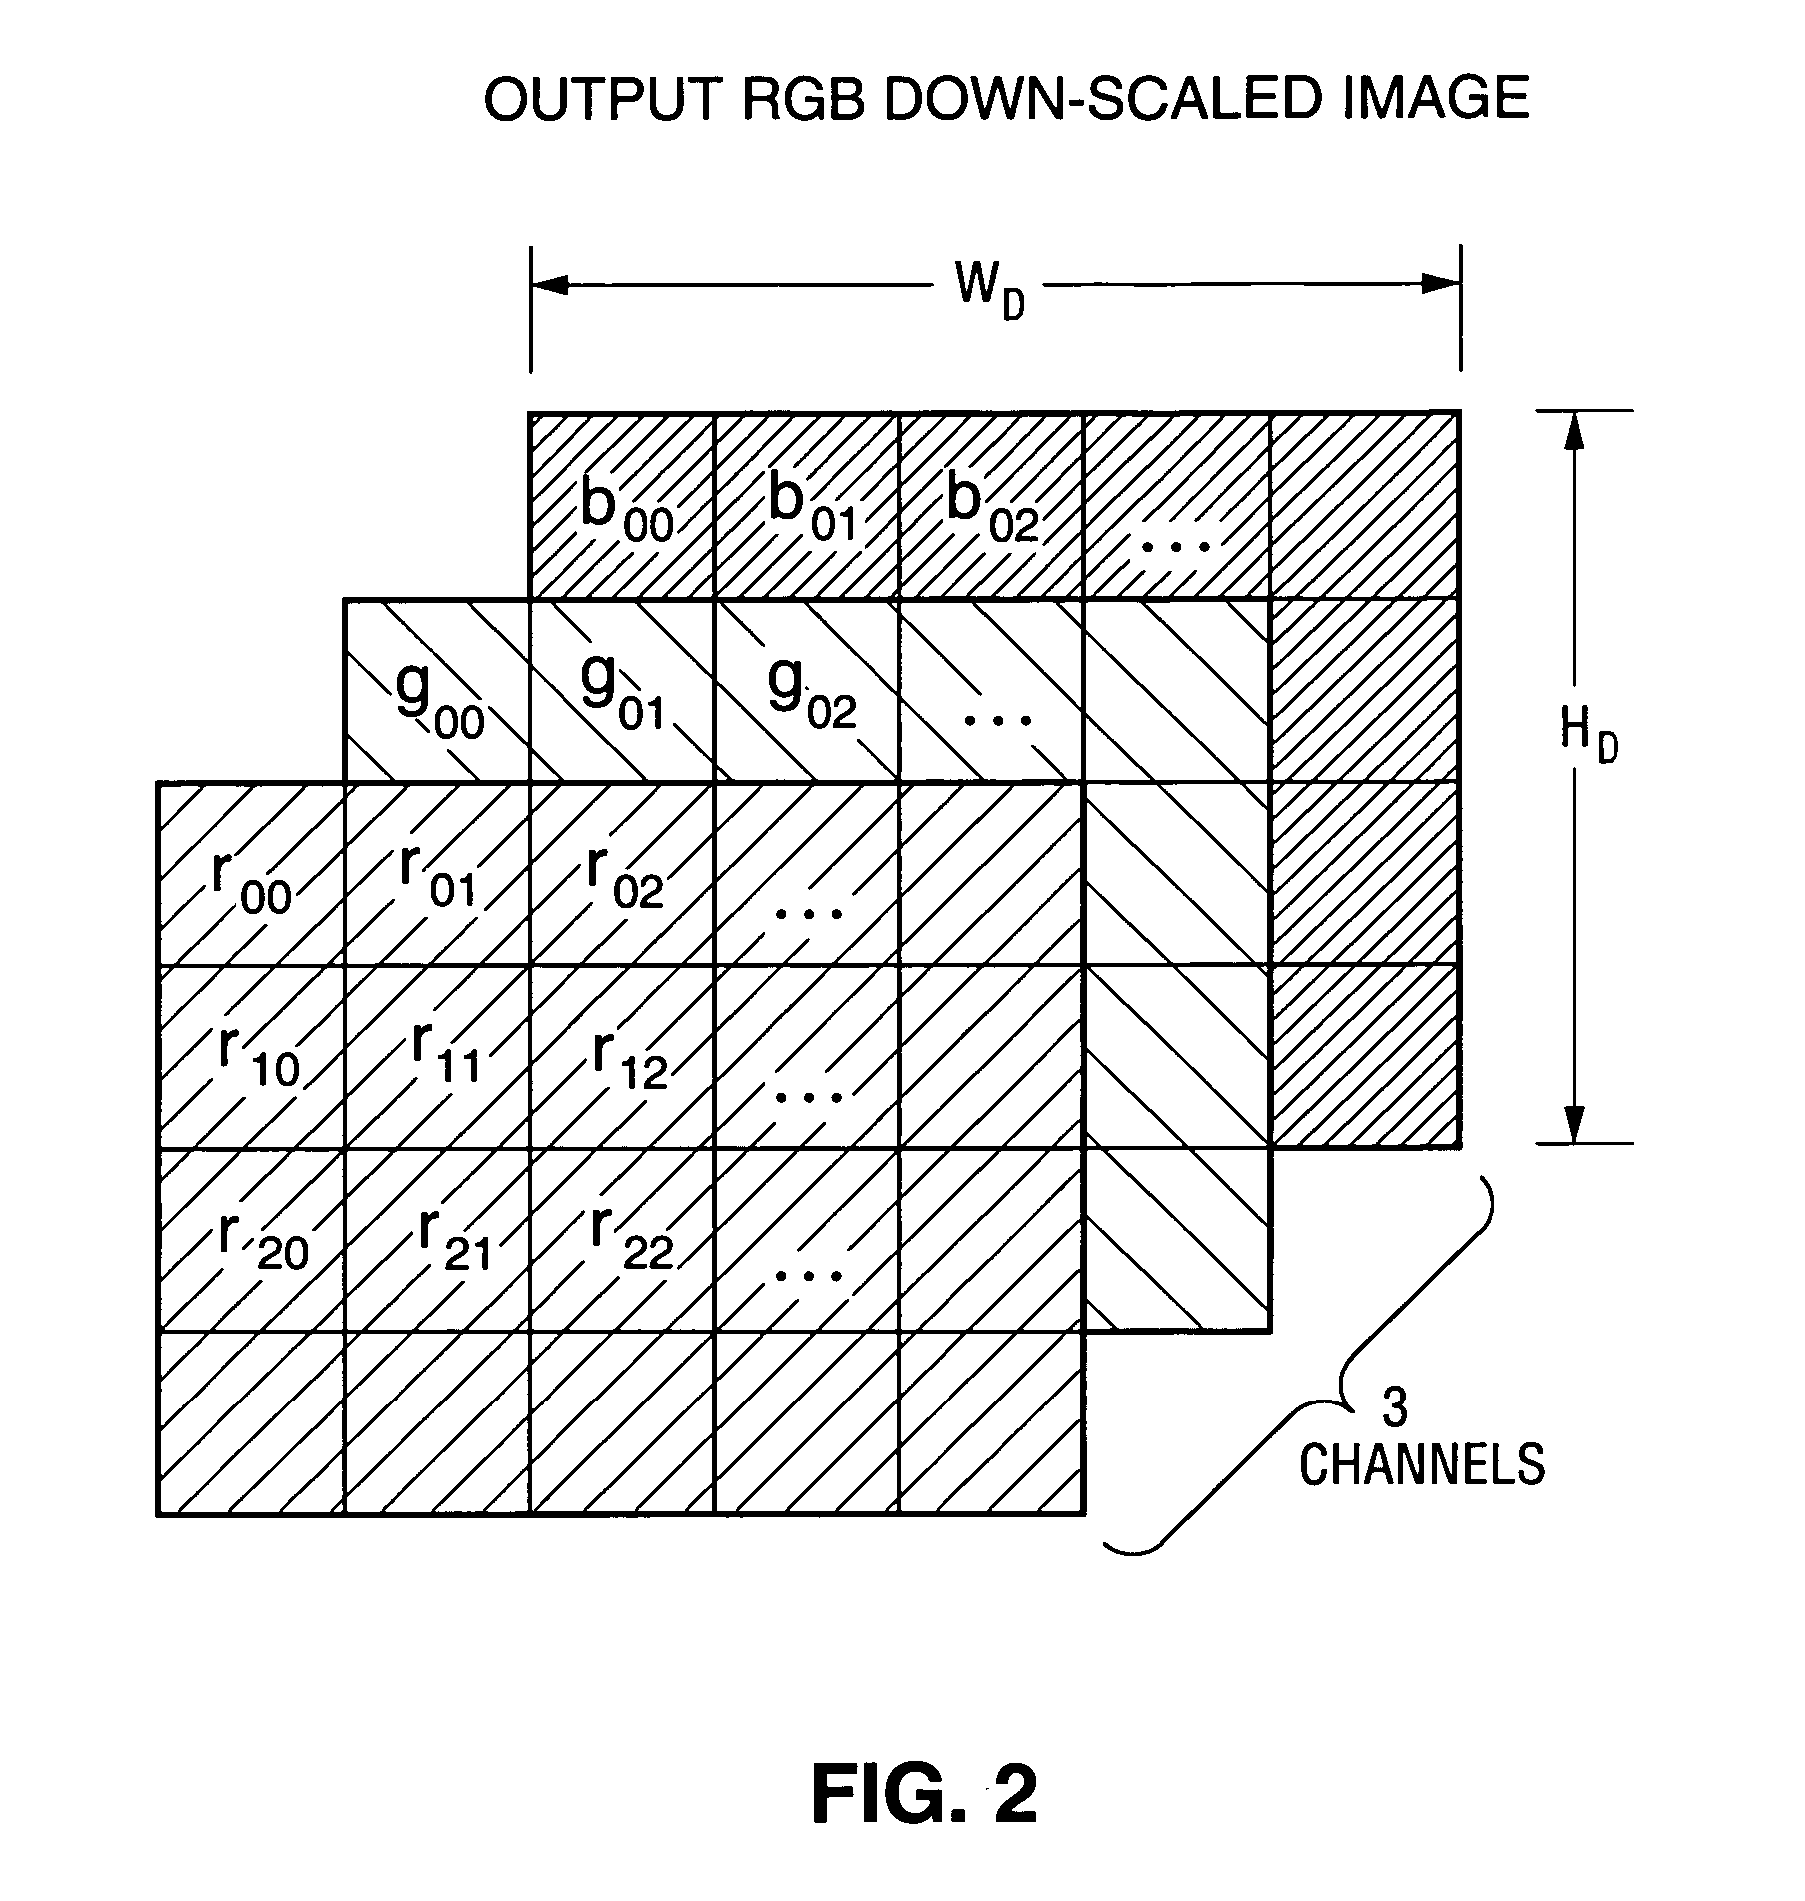 Method and circuit for integrated de-mosaicing and downscaling preferably with edge adaptive interpolation and color correlation to reduce aliasing artifacts